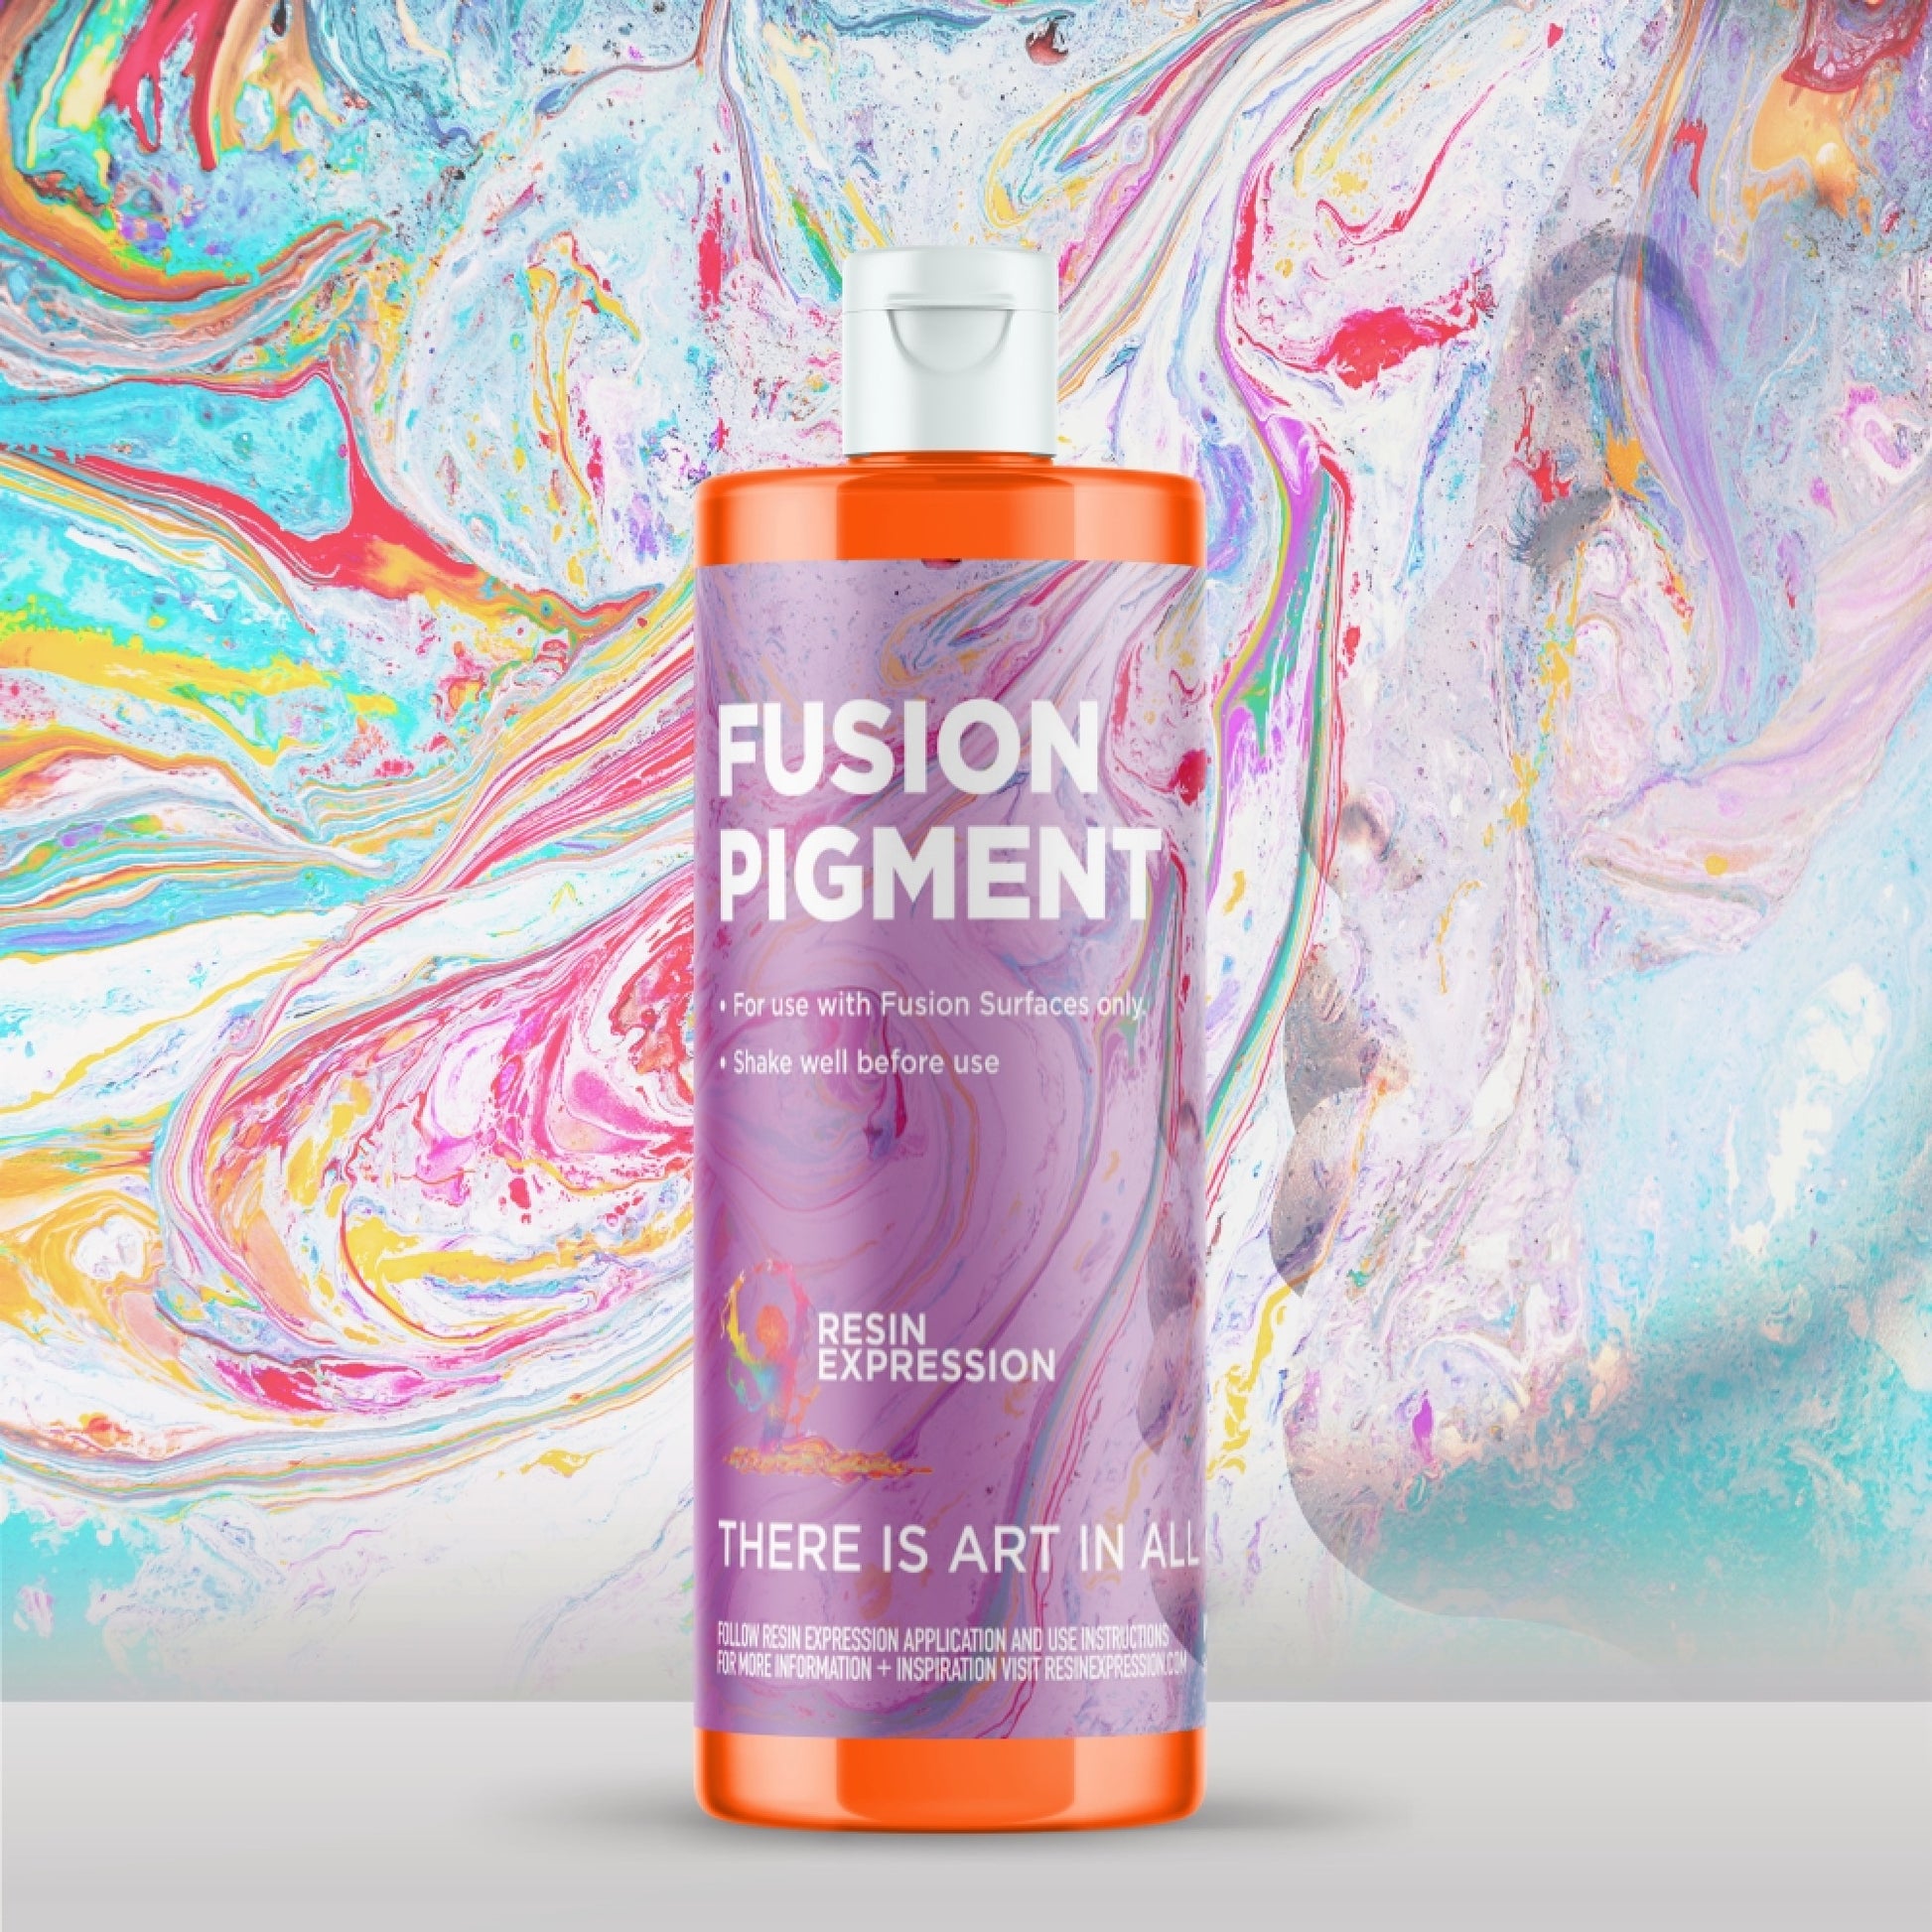 Fusion Surface Countertop Kit from Resin Expression empowers anyone to create art.